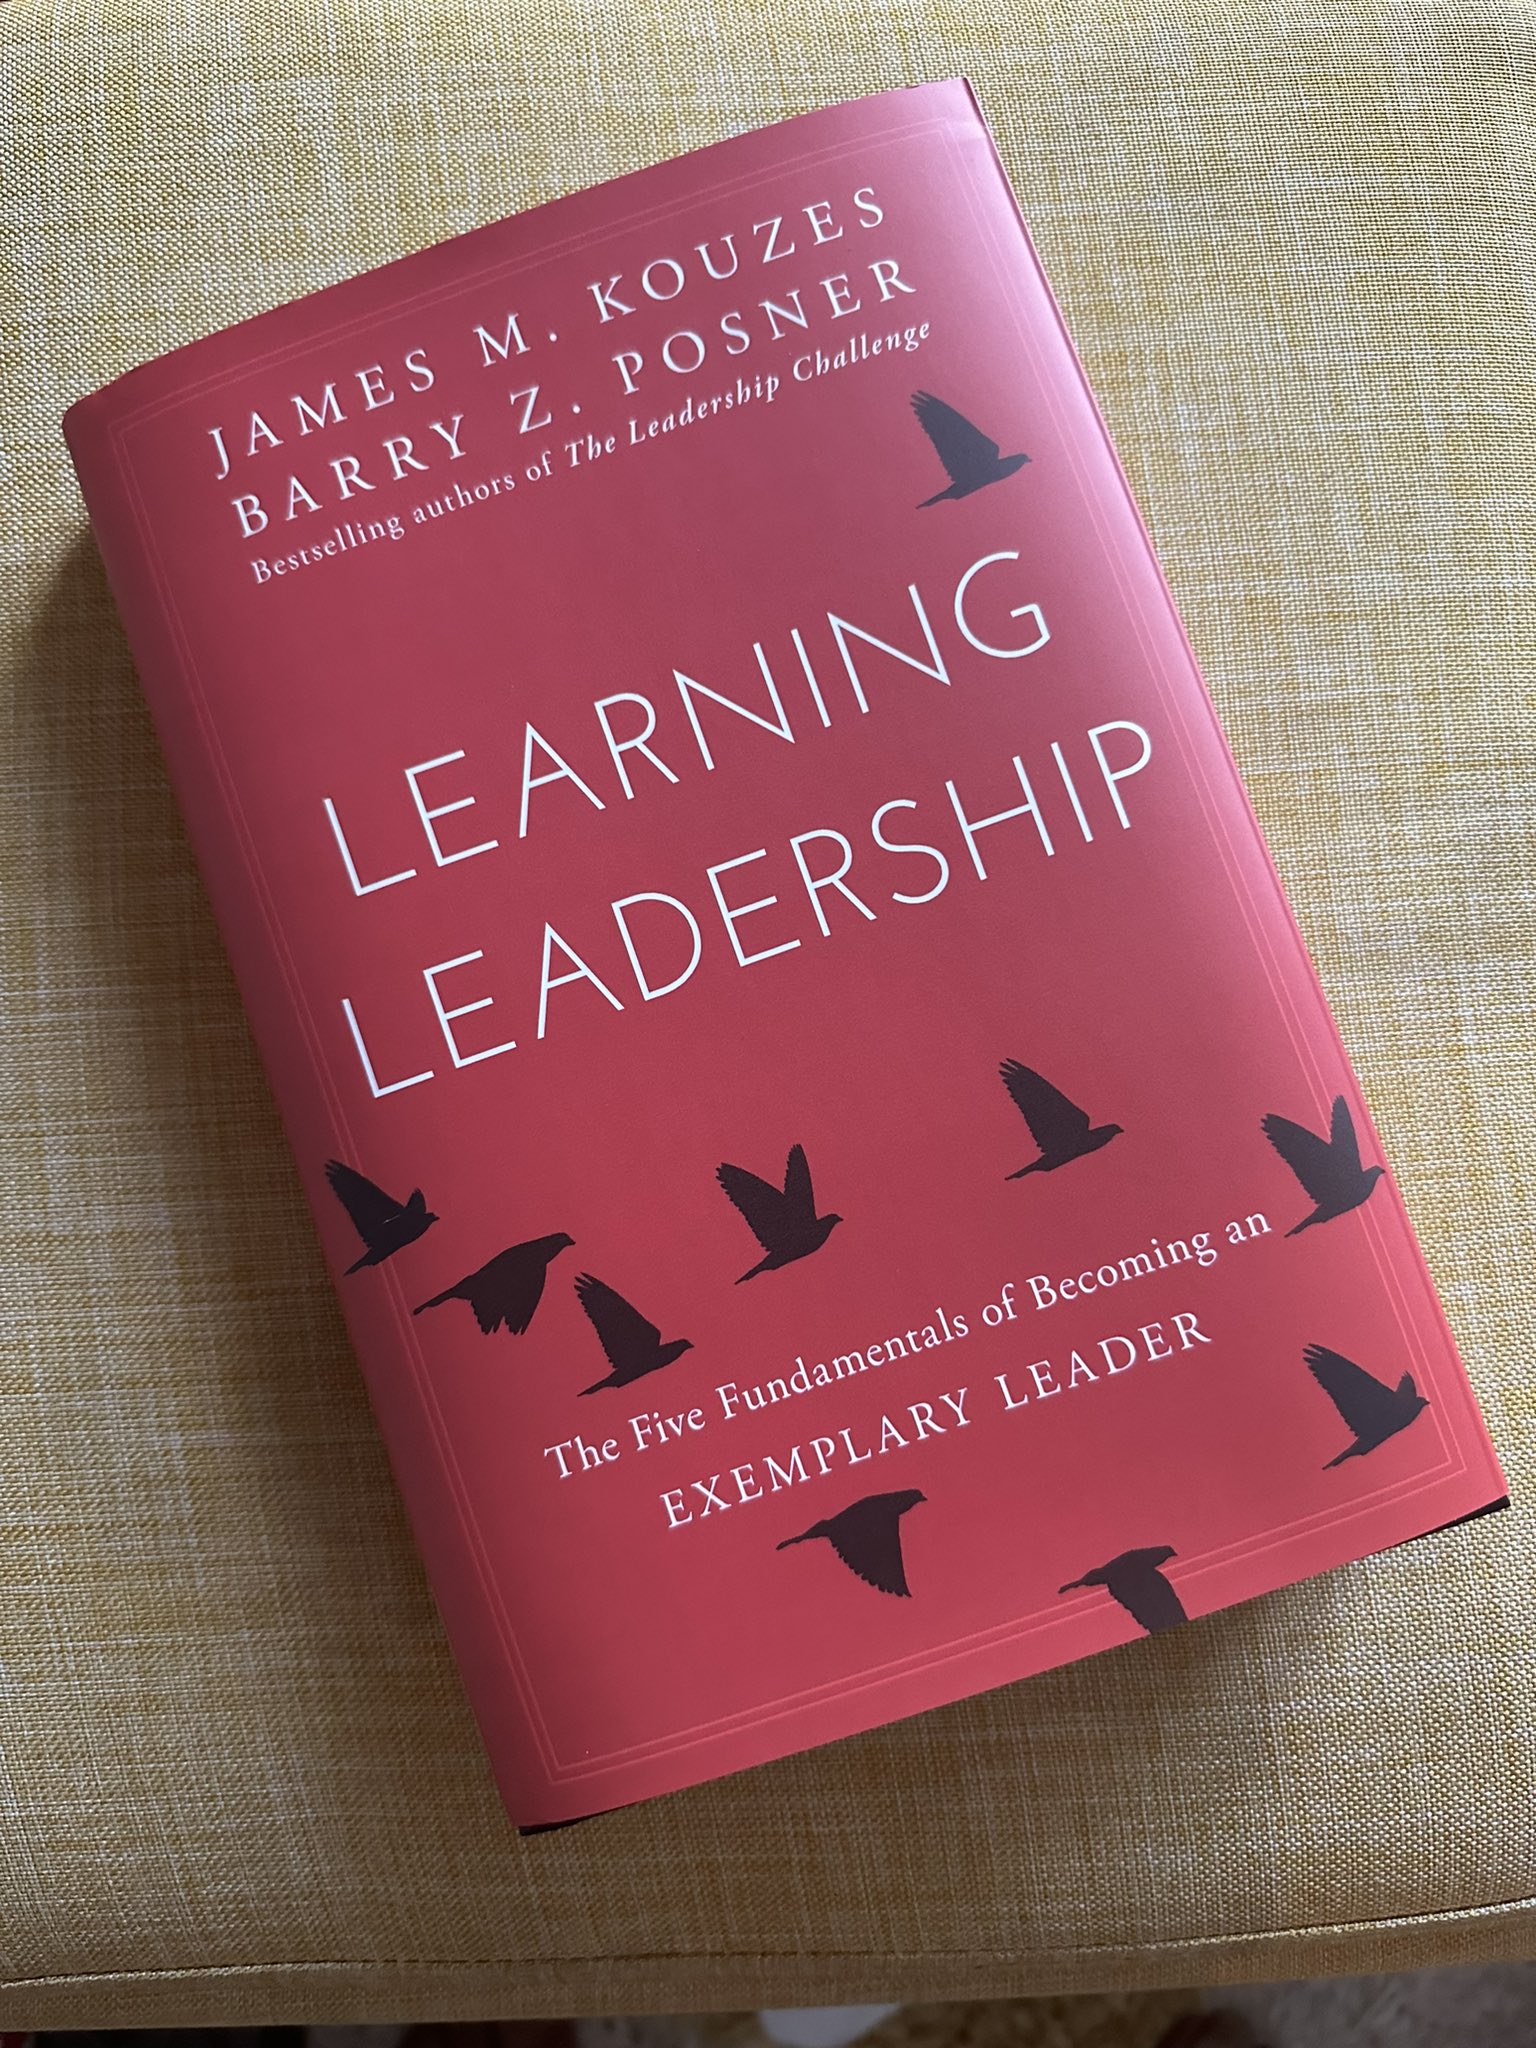 Learning Leadership: The Five Fundamentals of Becoming an